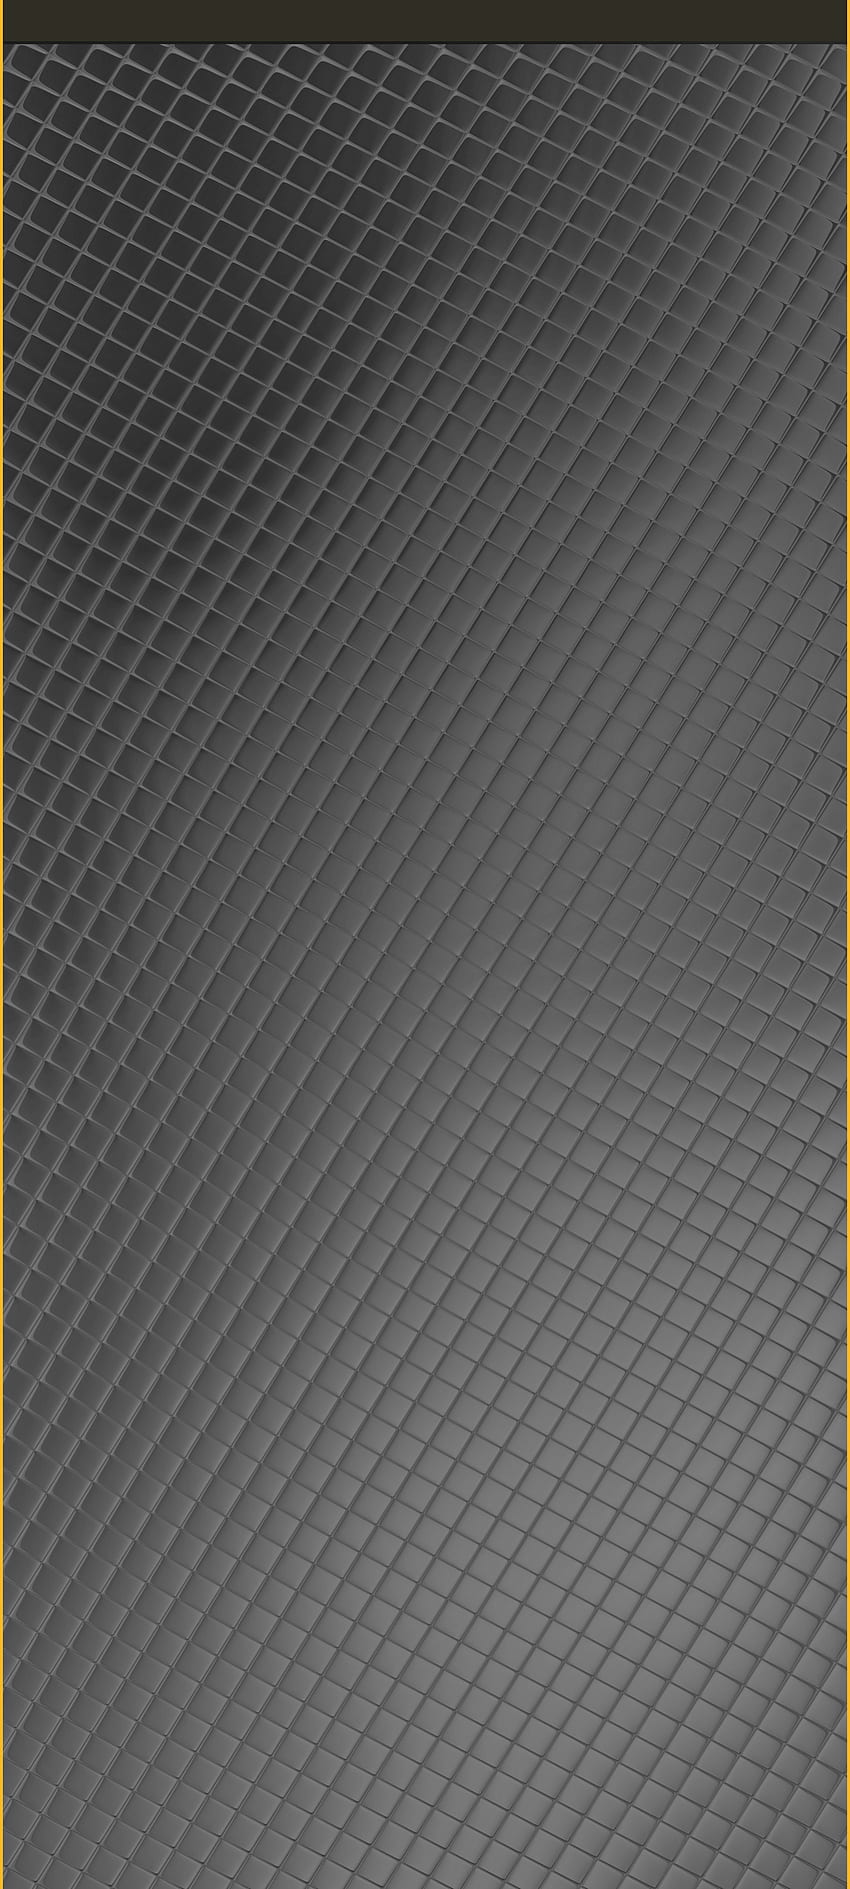 Grey Style iPhone13, iPhone, Basic, Galaxy, New, Art, iPhone 13, pattern, Cool, Modern, , design, Smooth, locked, A51, Gray, Background, Galaxy S21, Druffix, 2021, M32, Magma, Android, Acer, No1, Apple, Colors, S10, Stylez, Galaxy A32, Love, LG, Samsung, Edge, Nokia, Original, Smartphone HD phone wallpaper